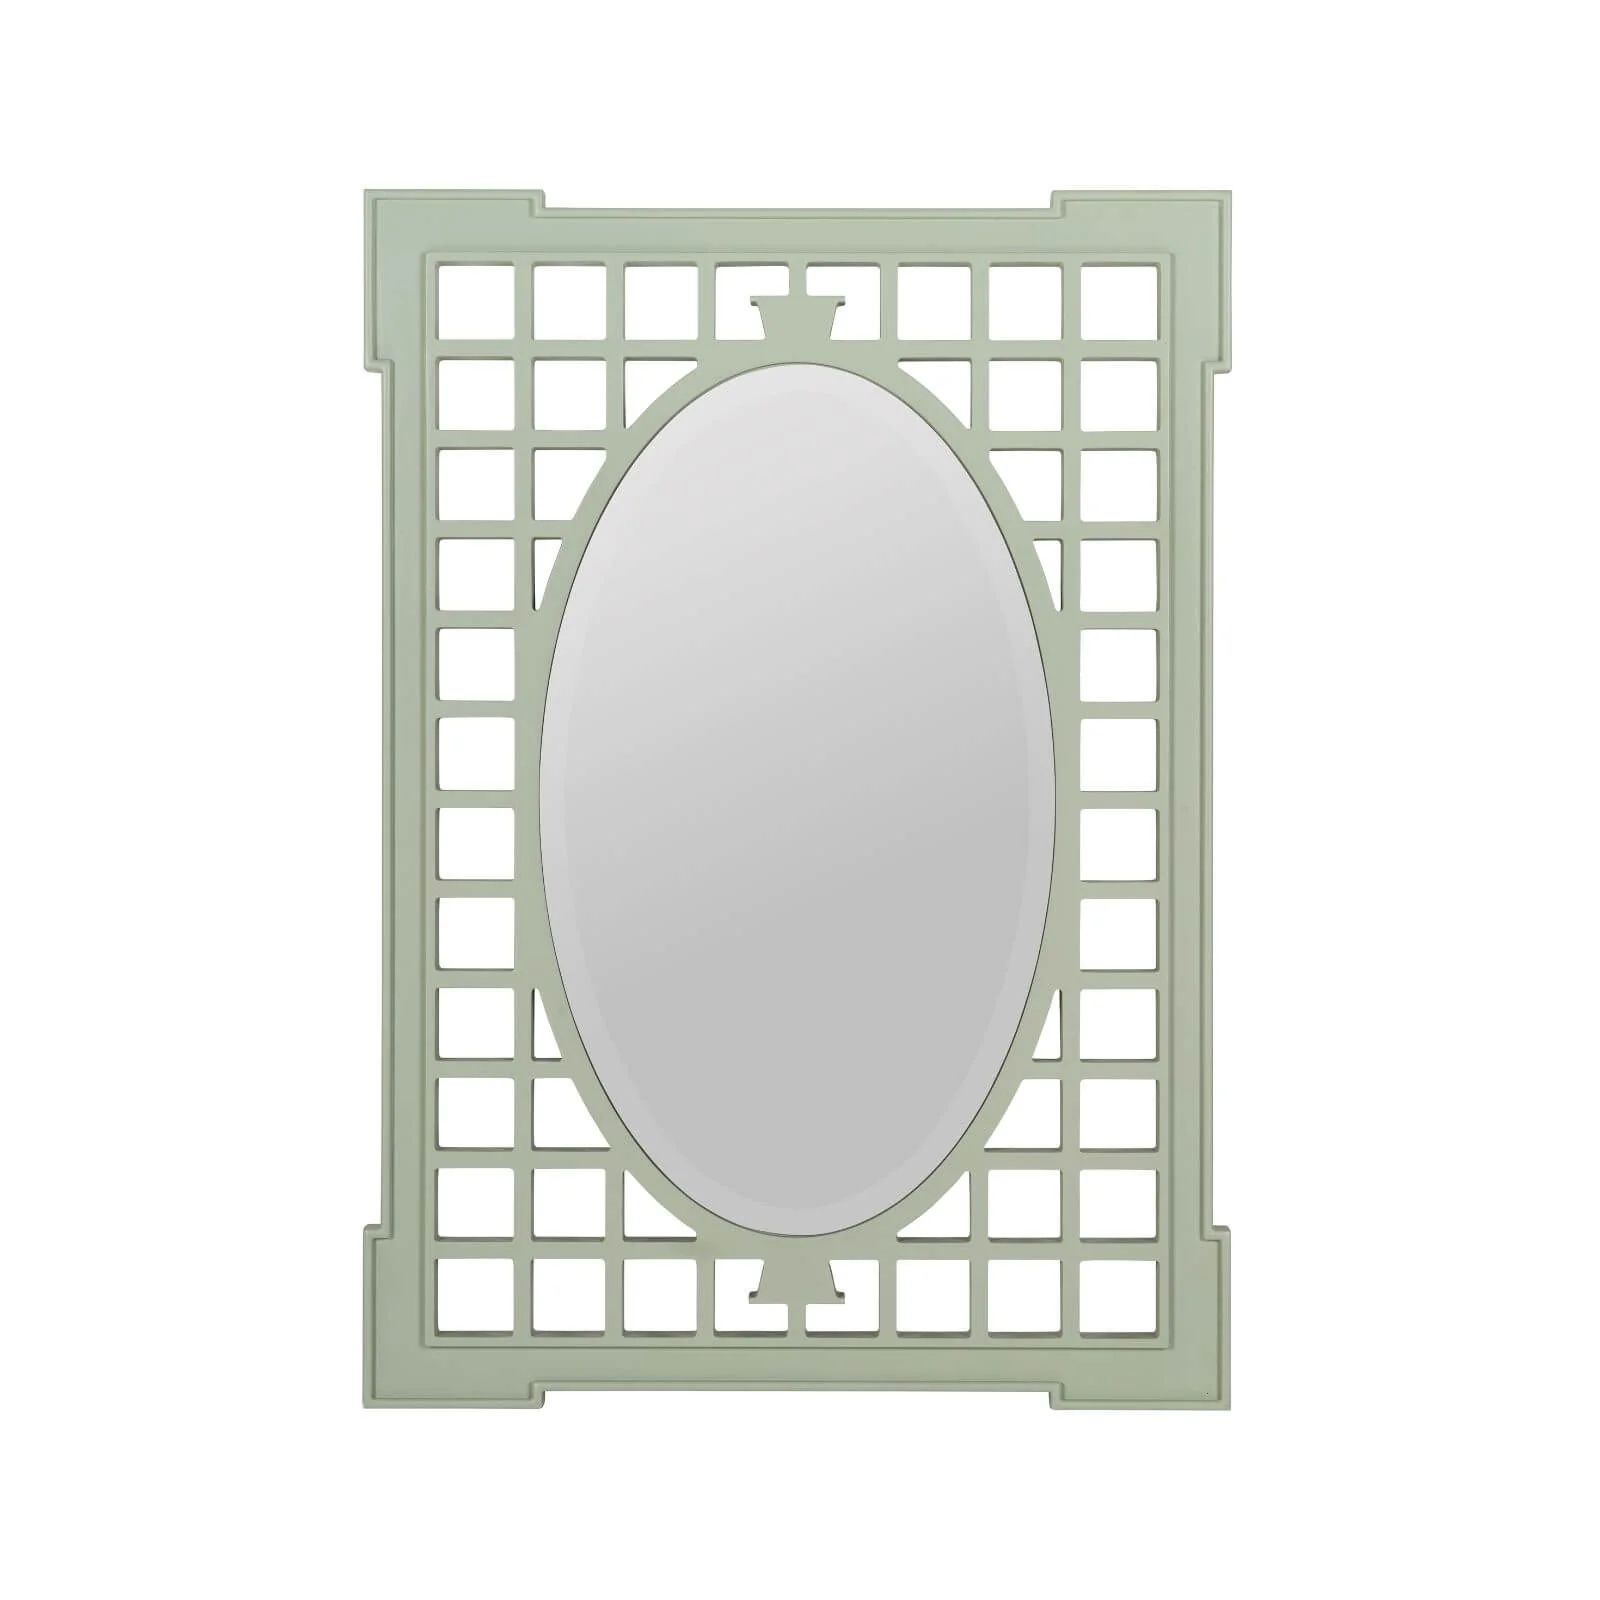 Garden Mirror in Sage | Brooke and Lou